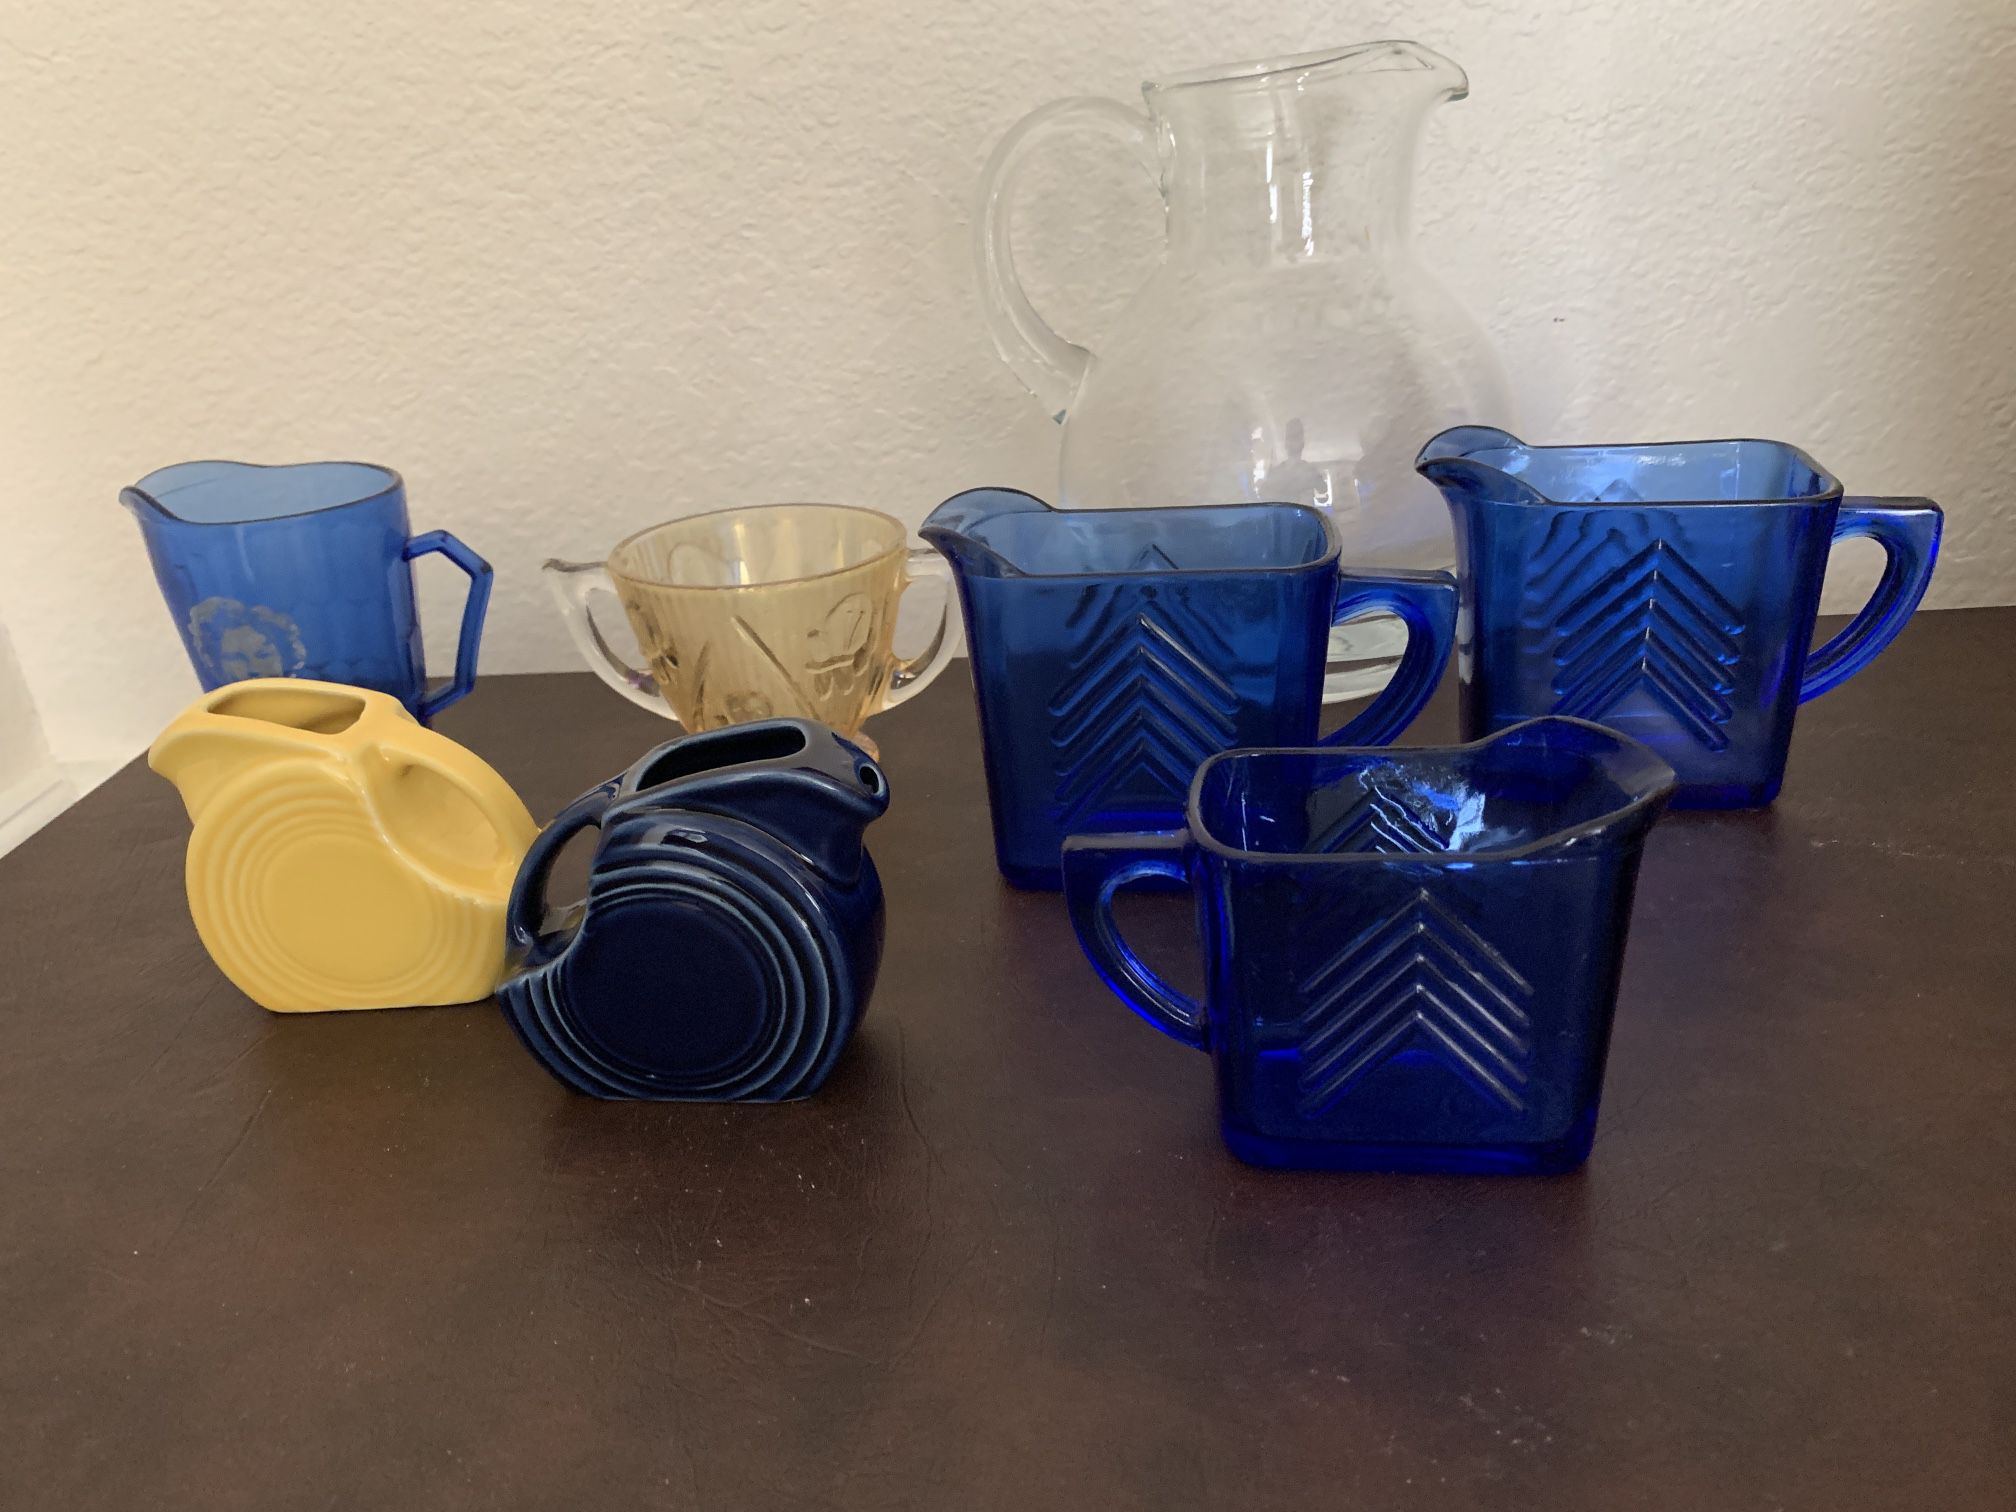 depression glass and vintage creamers sugars $17 each. cobalt blue Shirley Temple fiesta ware